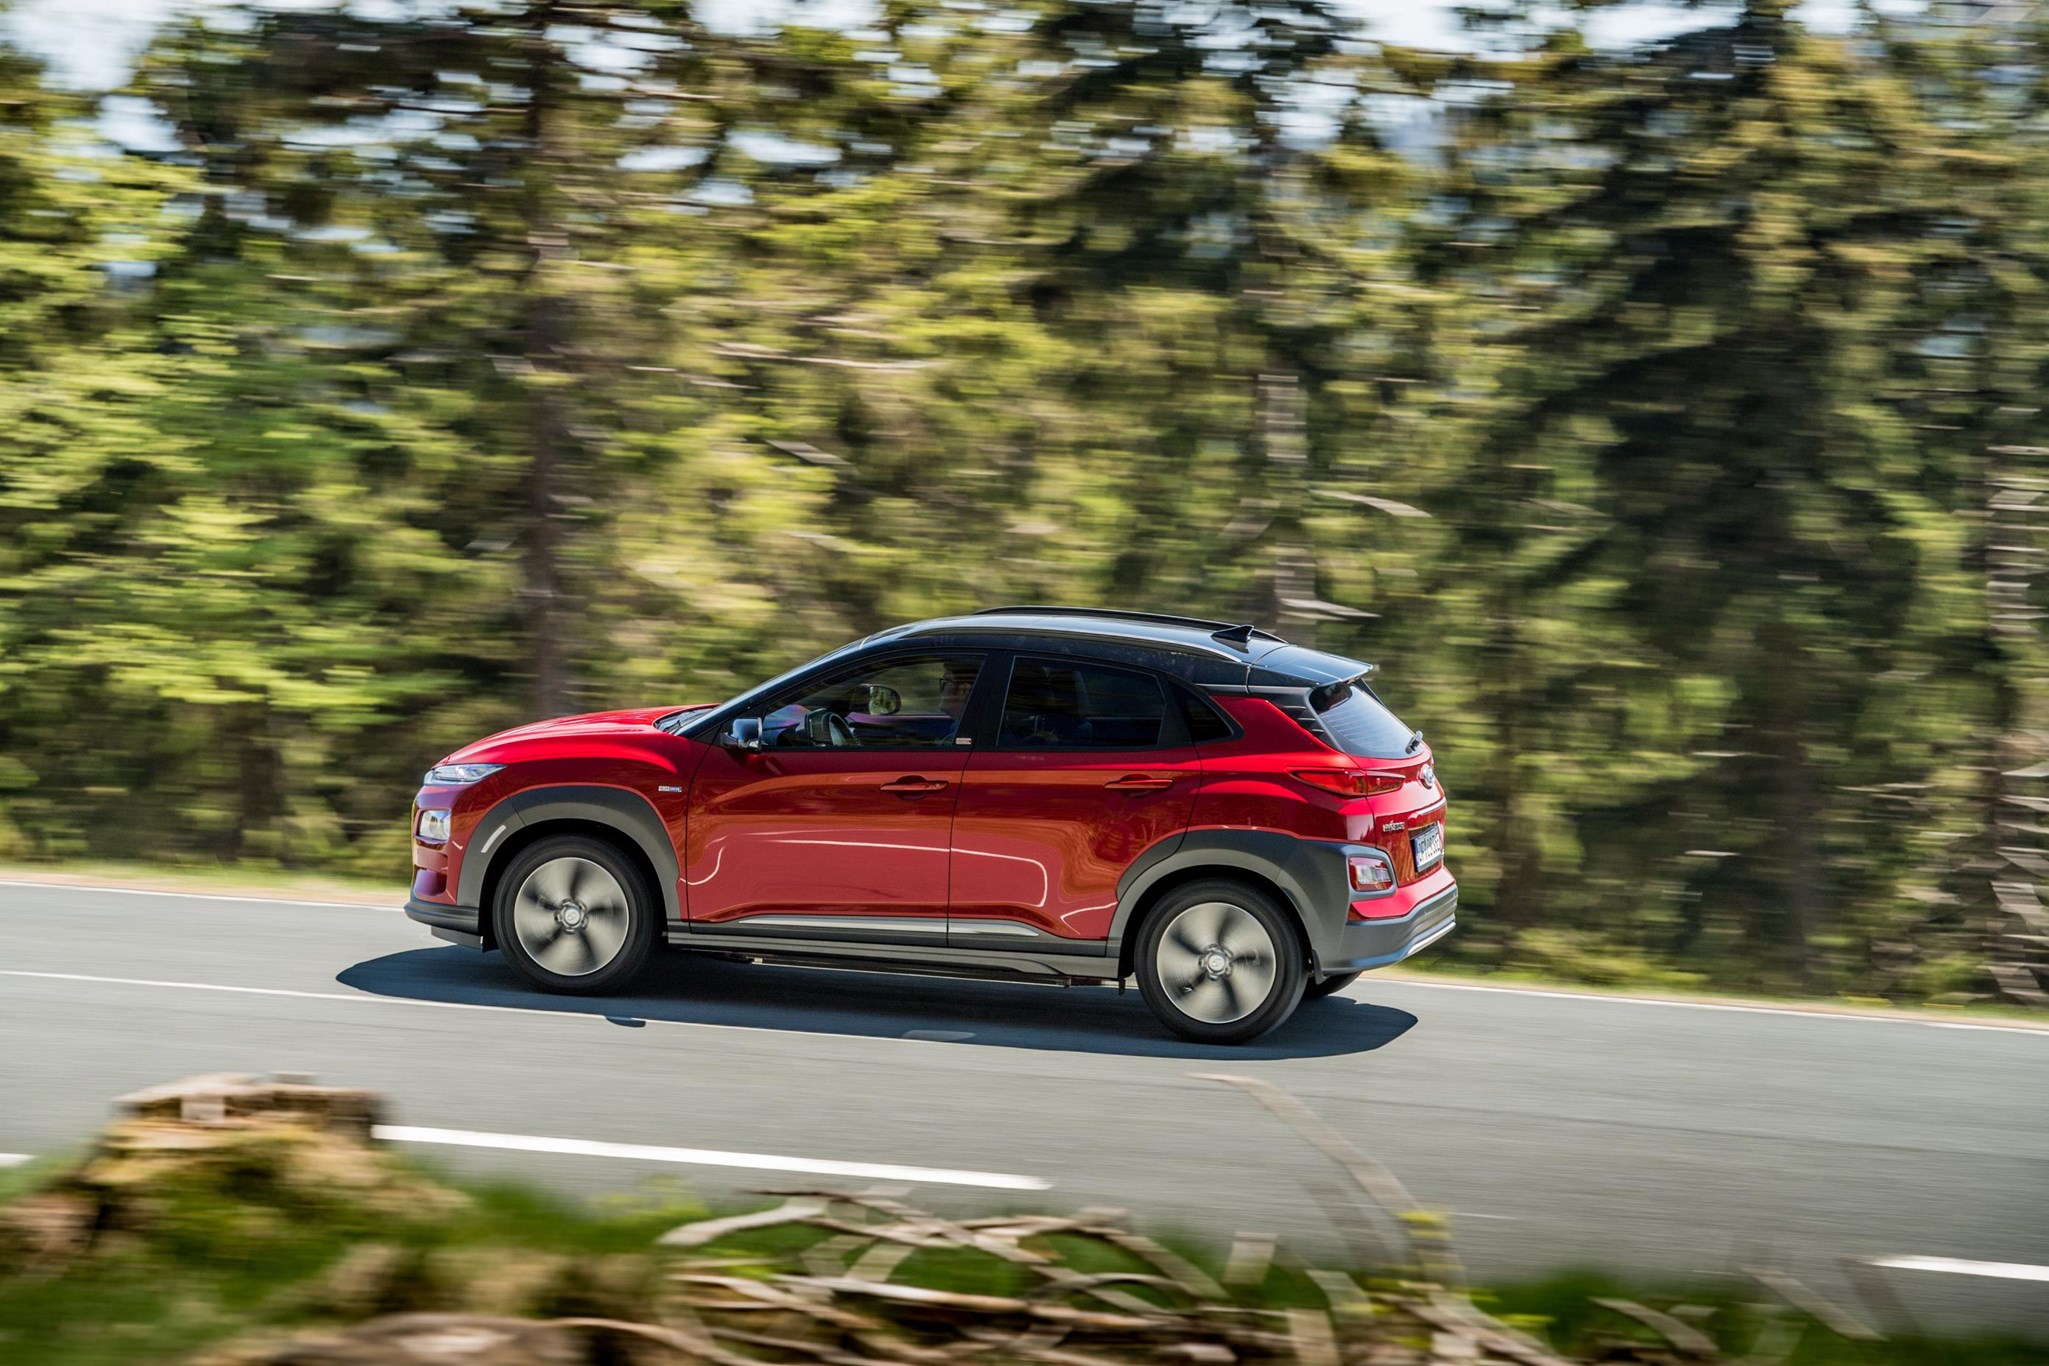 New Hyundai Kona SUV specs, pics and details on Electric model ...